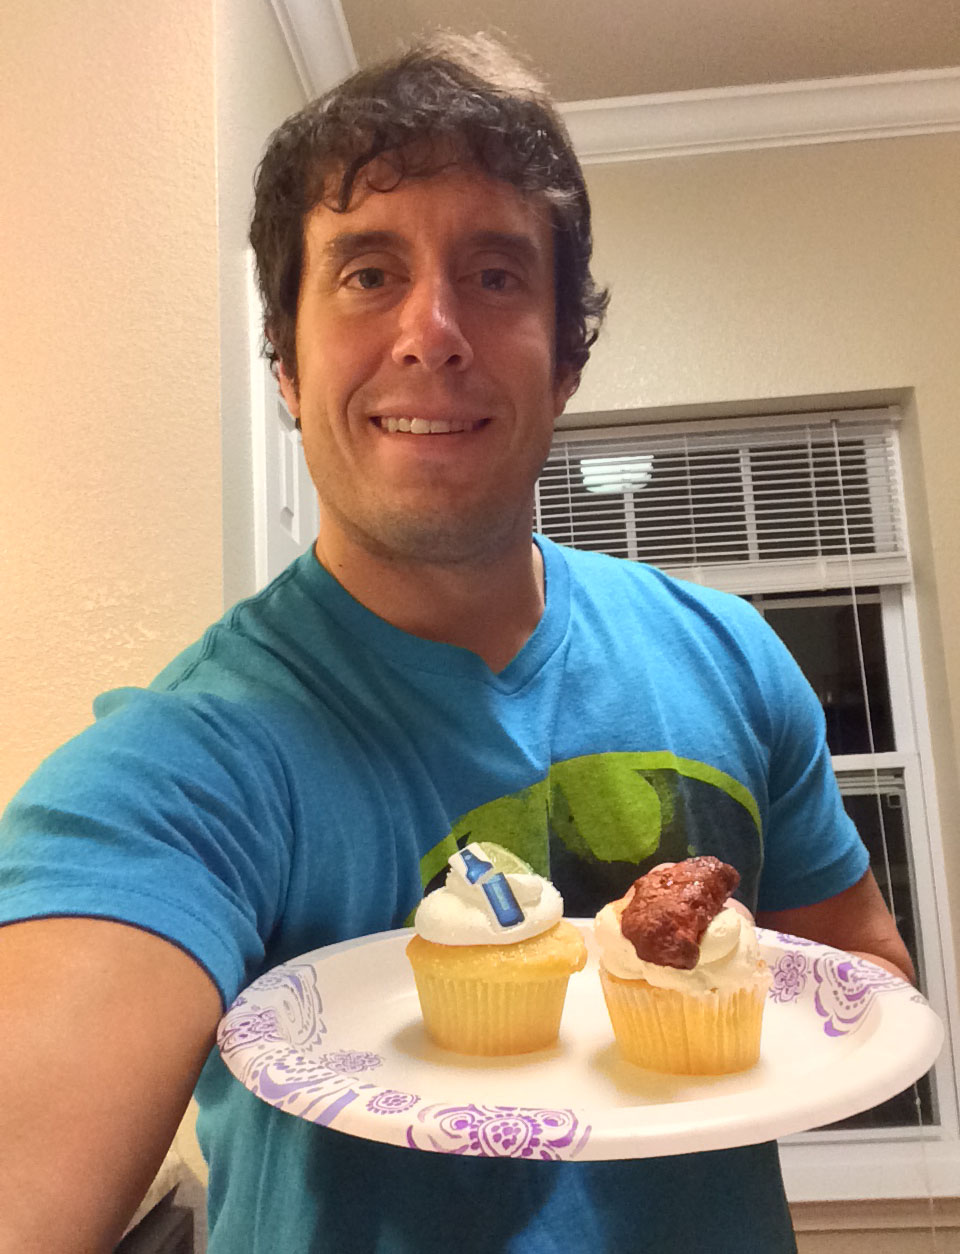 Me with the cupcakes I purchased. The one on the right is the chicken wing selection and the one on the left is the one I am about to explain.